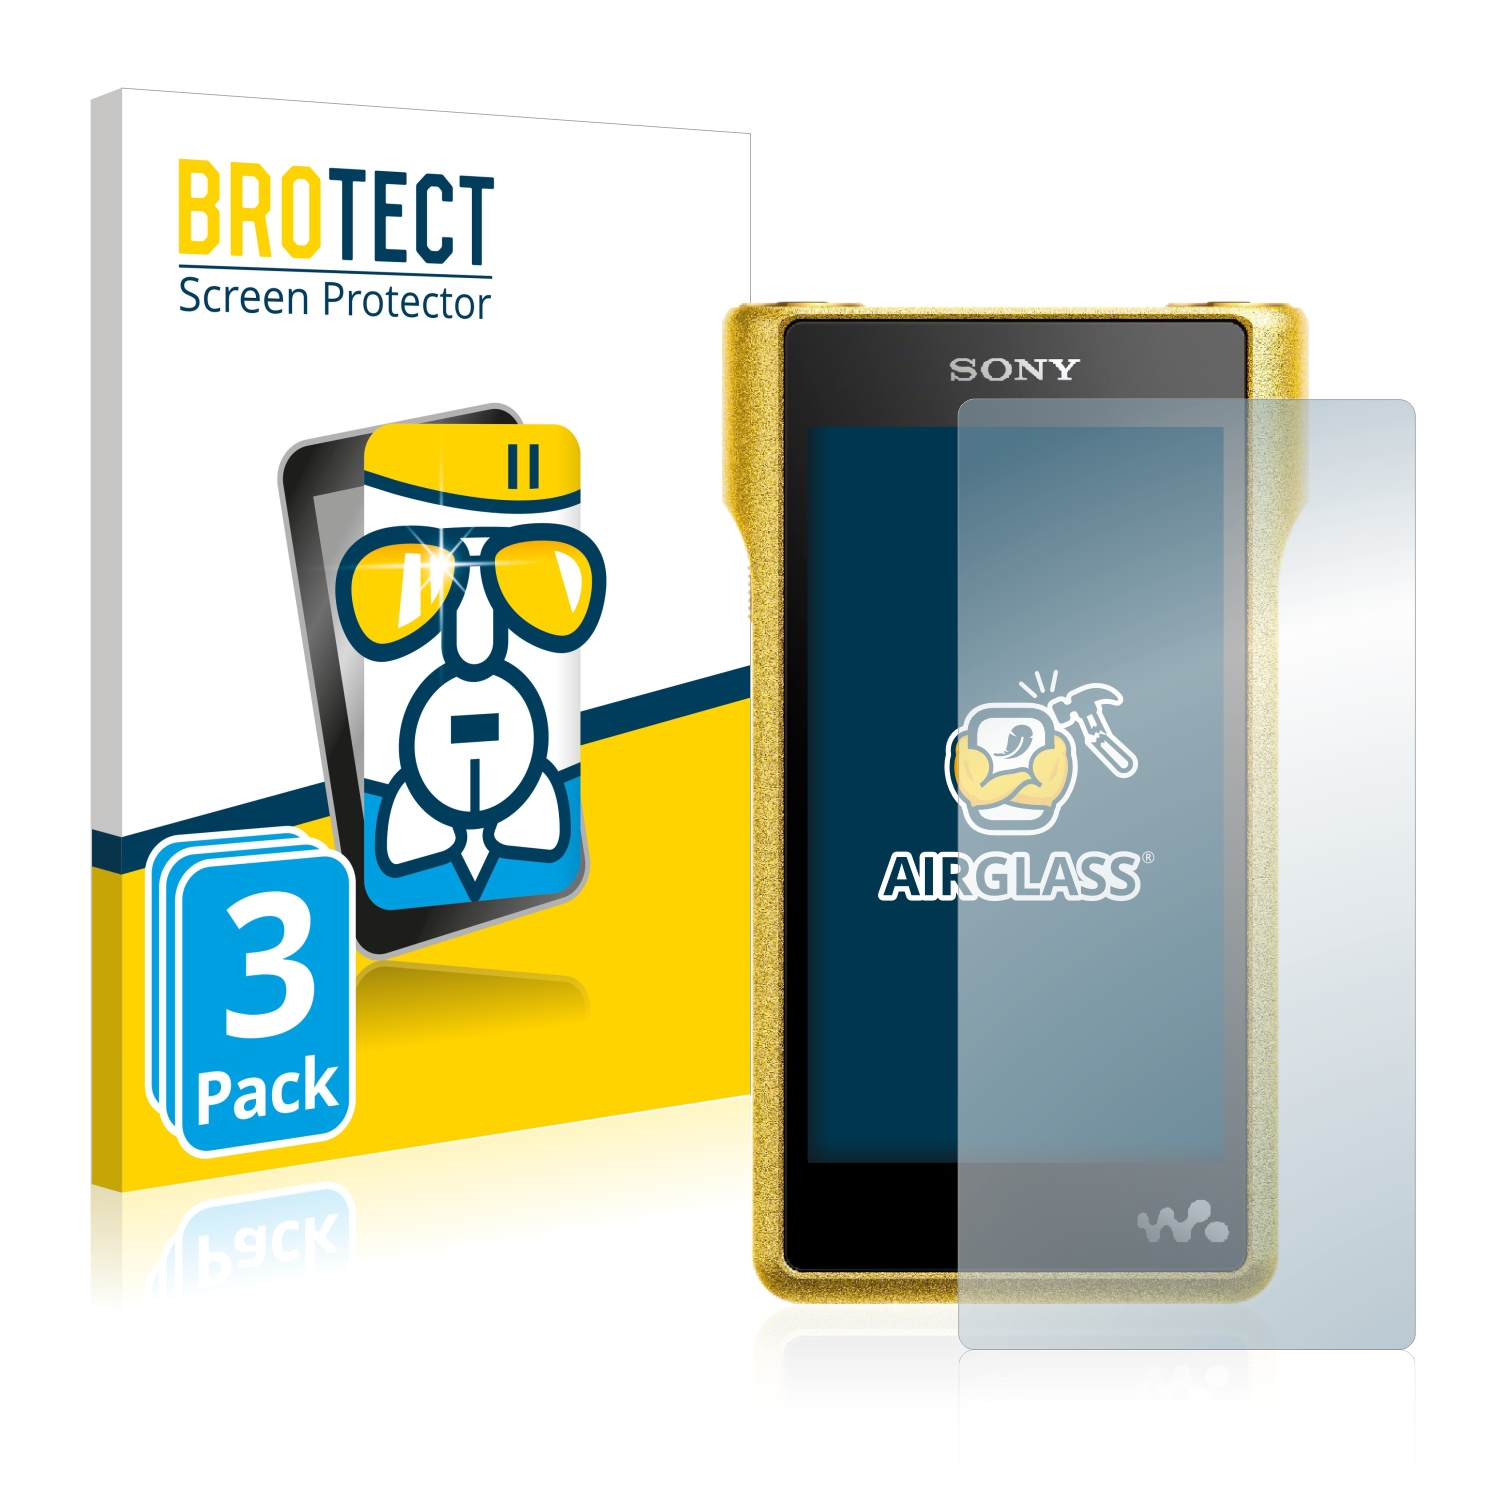 Strong Scratch Protection upscreen Scratch Shield Clear Screen Protector for Sony Walkman NW-WM1A Multitouch Optimized High Transparency 